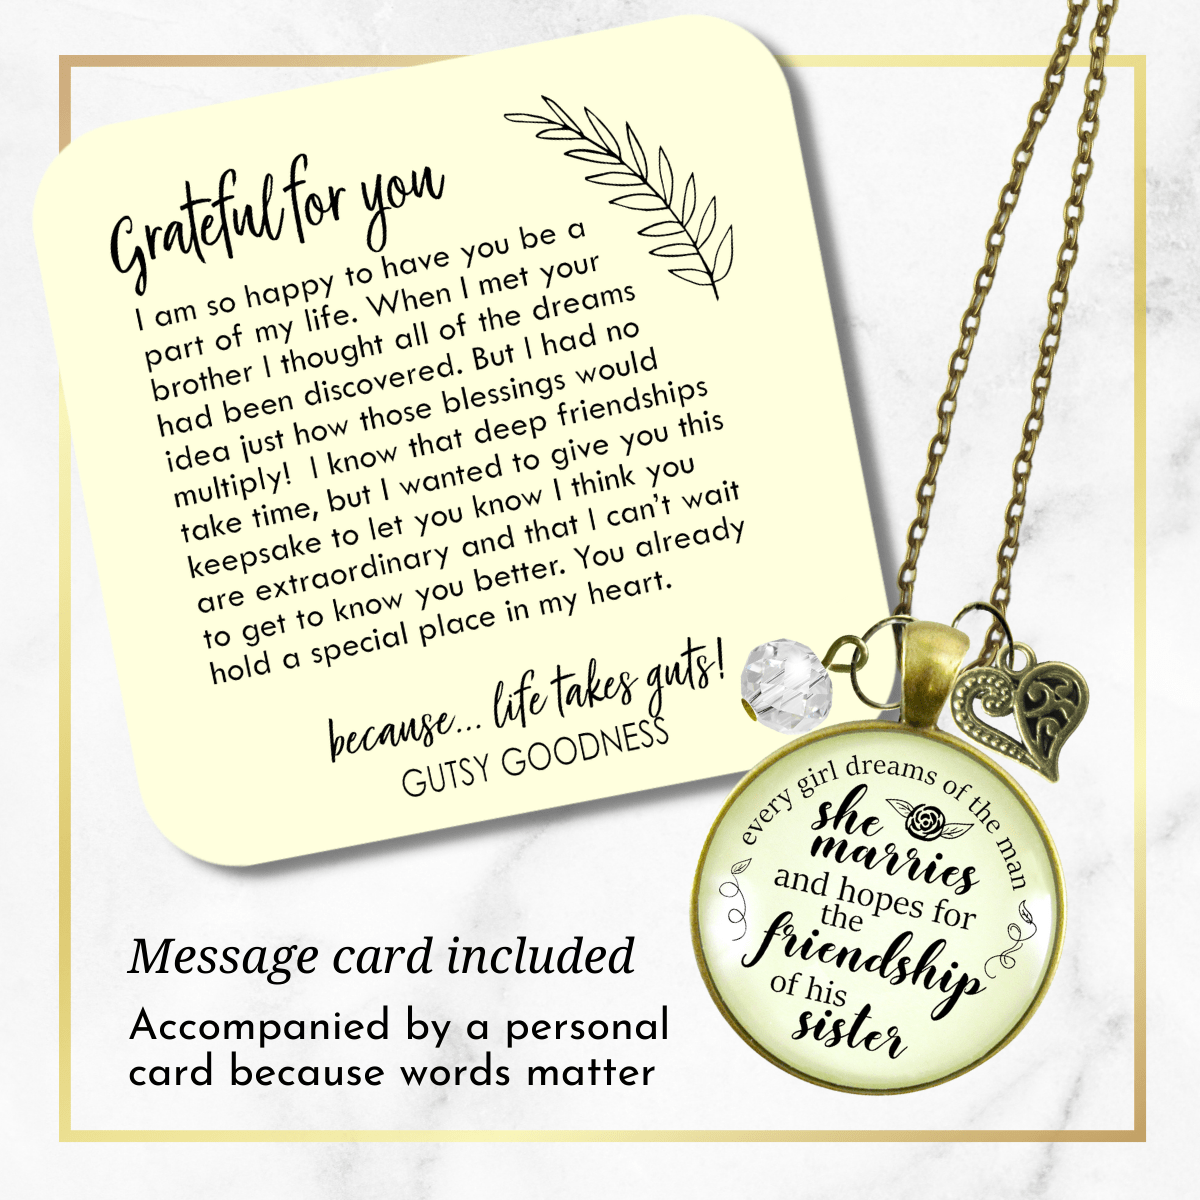 Gutsy Goodness Sister-In-Law Necklace Dreams New Sister Wedding Day Gift from Bride - Gutsy Goodness;Sister-In-Law Necklace Dreams New Sister Wedding Day Gift From Bride - Gutsy Goodness Handmade Jewelry Gifts